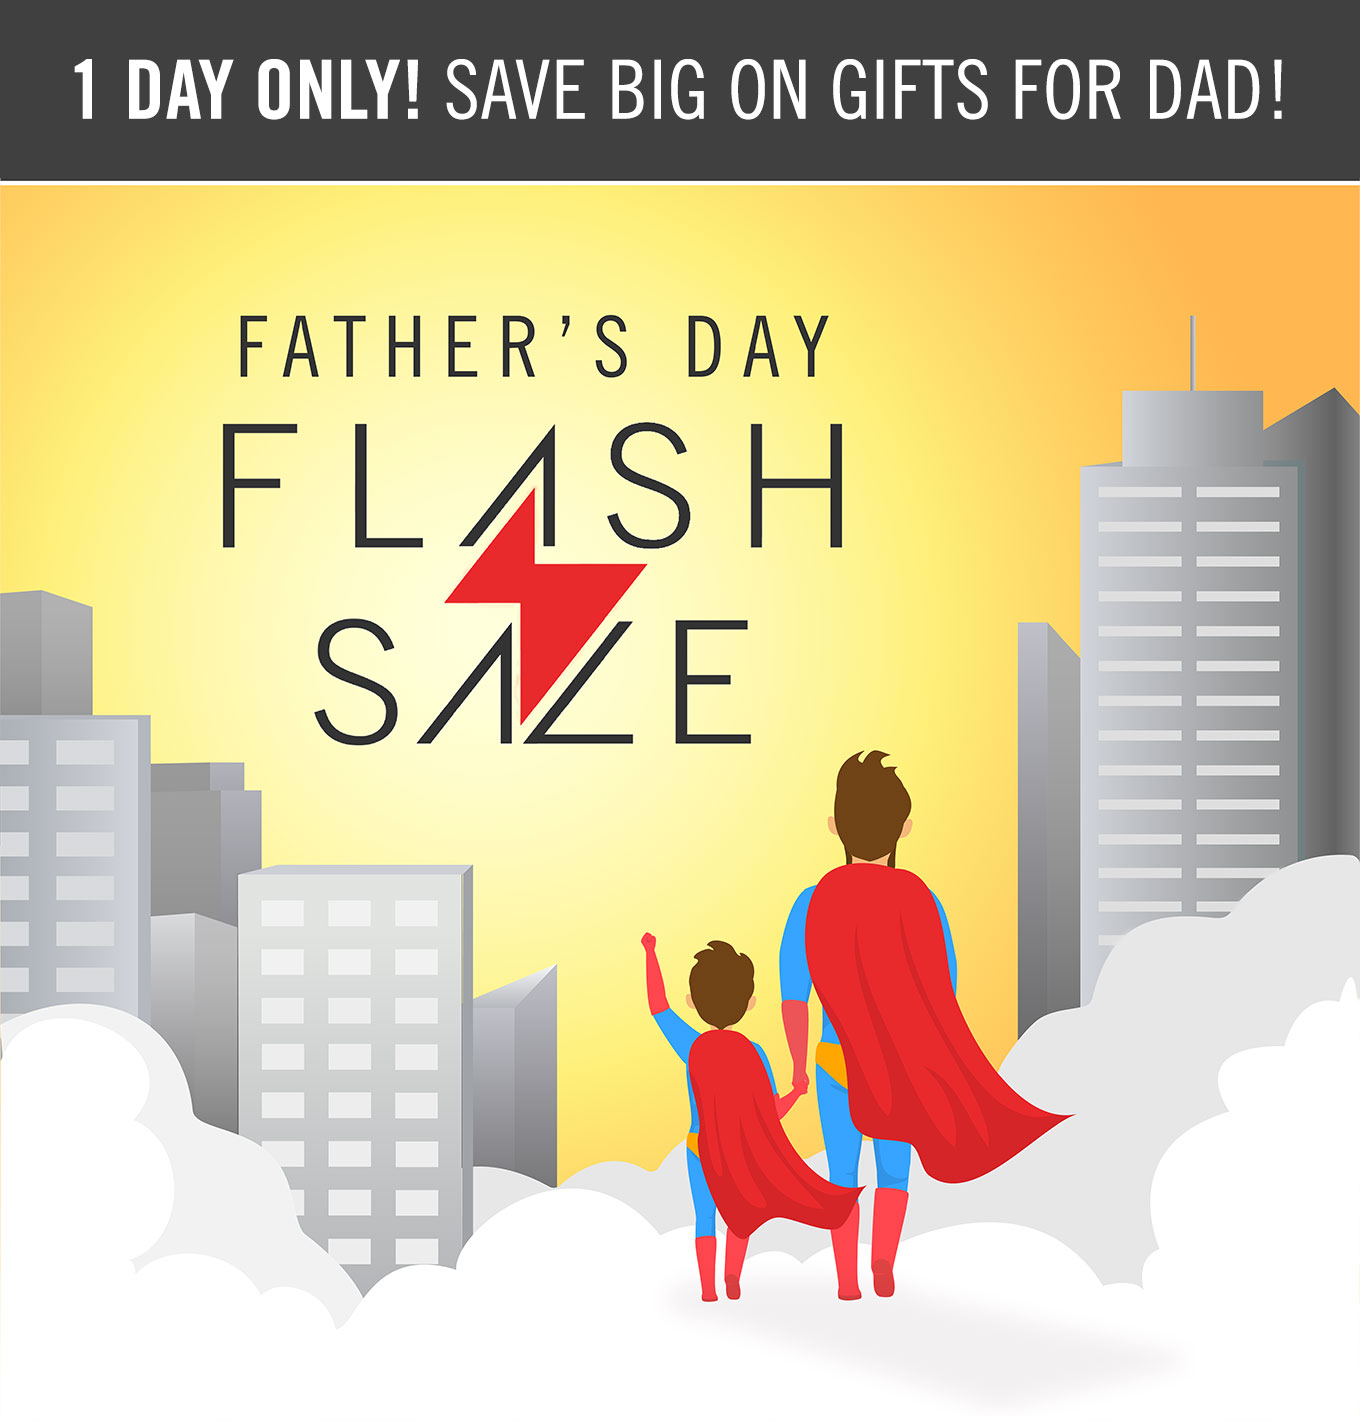 Flash Sale June 7! One day only! Save big on gifts for dad!.